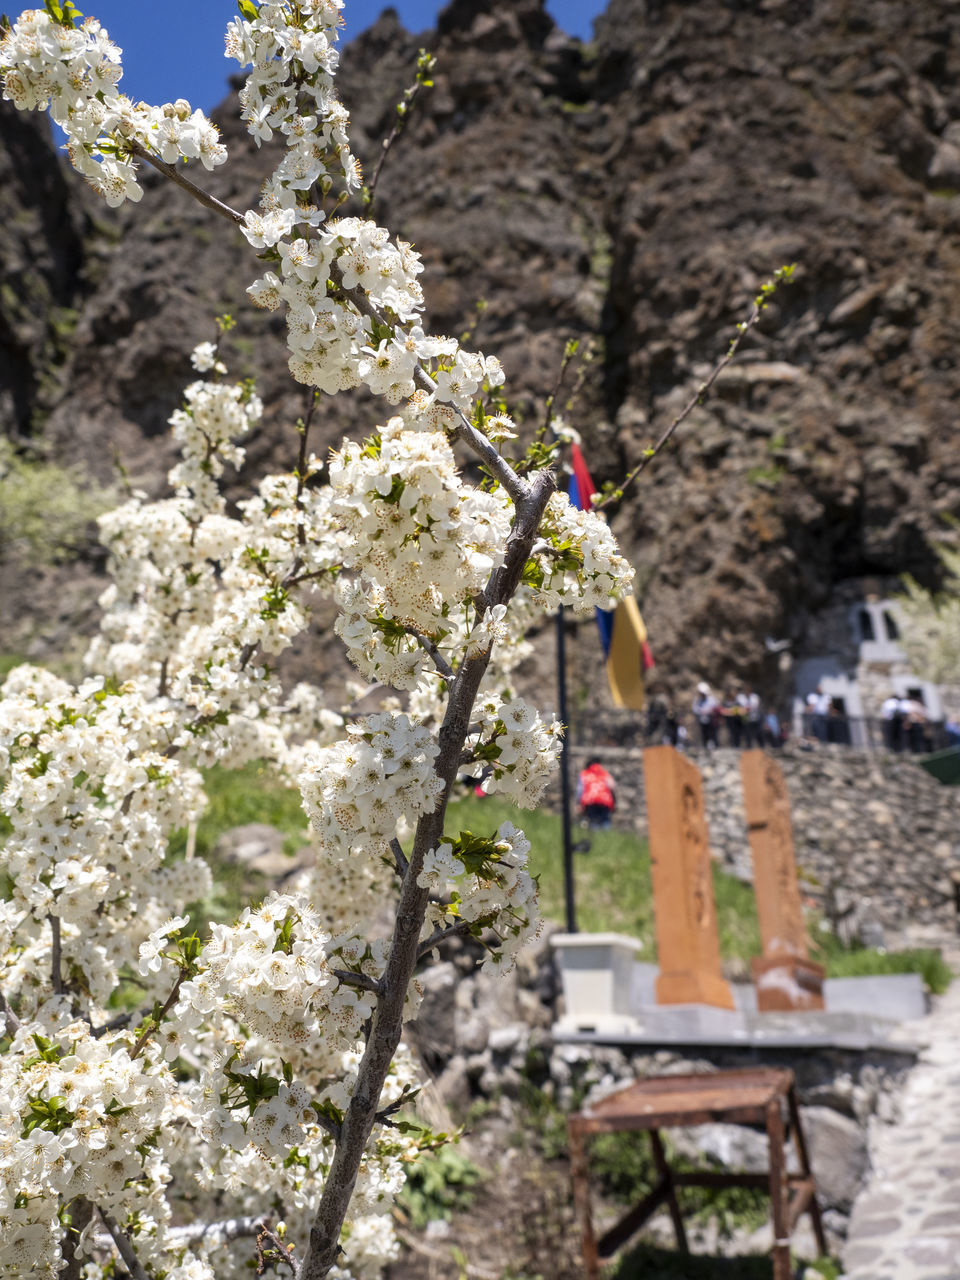 plant, flower, flowering plant, nature, tree, beauty in nature, day, no people, freshness, spring, springtime, growth, blossom, mountain, outdoors, rock, architecture, cherry blossom, sunlight, fragility, religion, travel destinations, sky, tranquility, focus on foreground, built structure